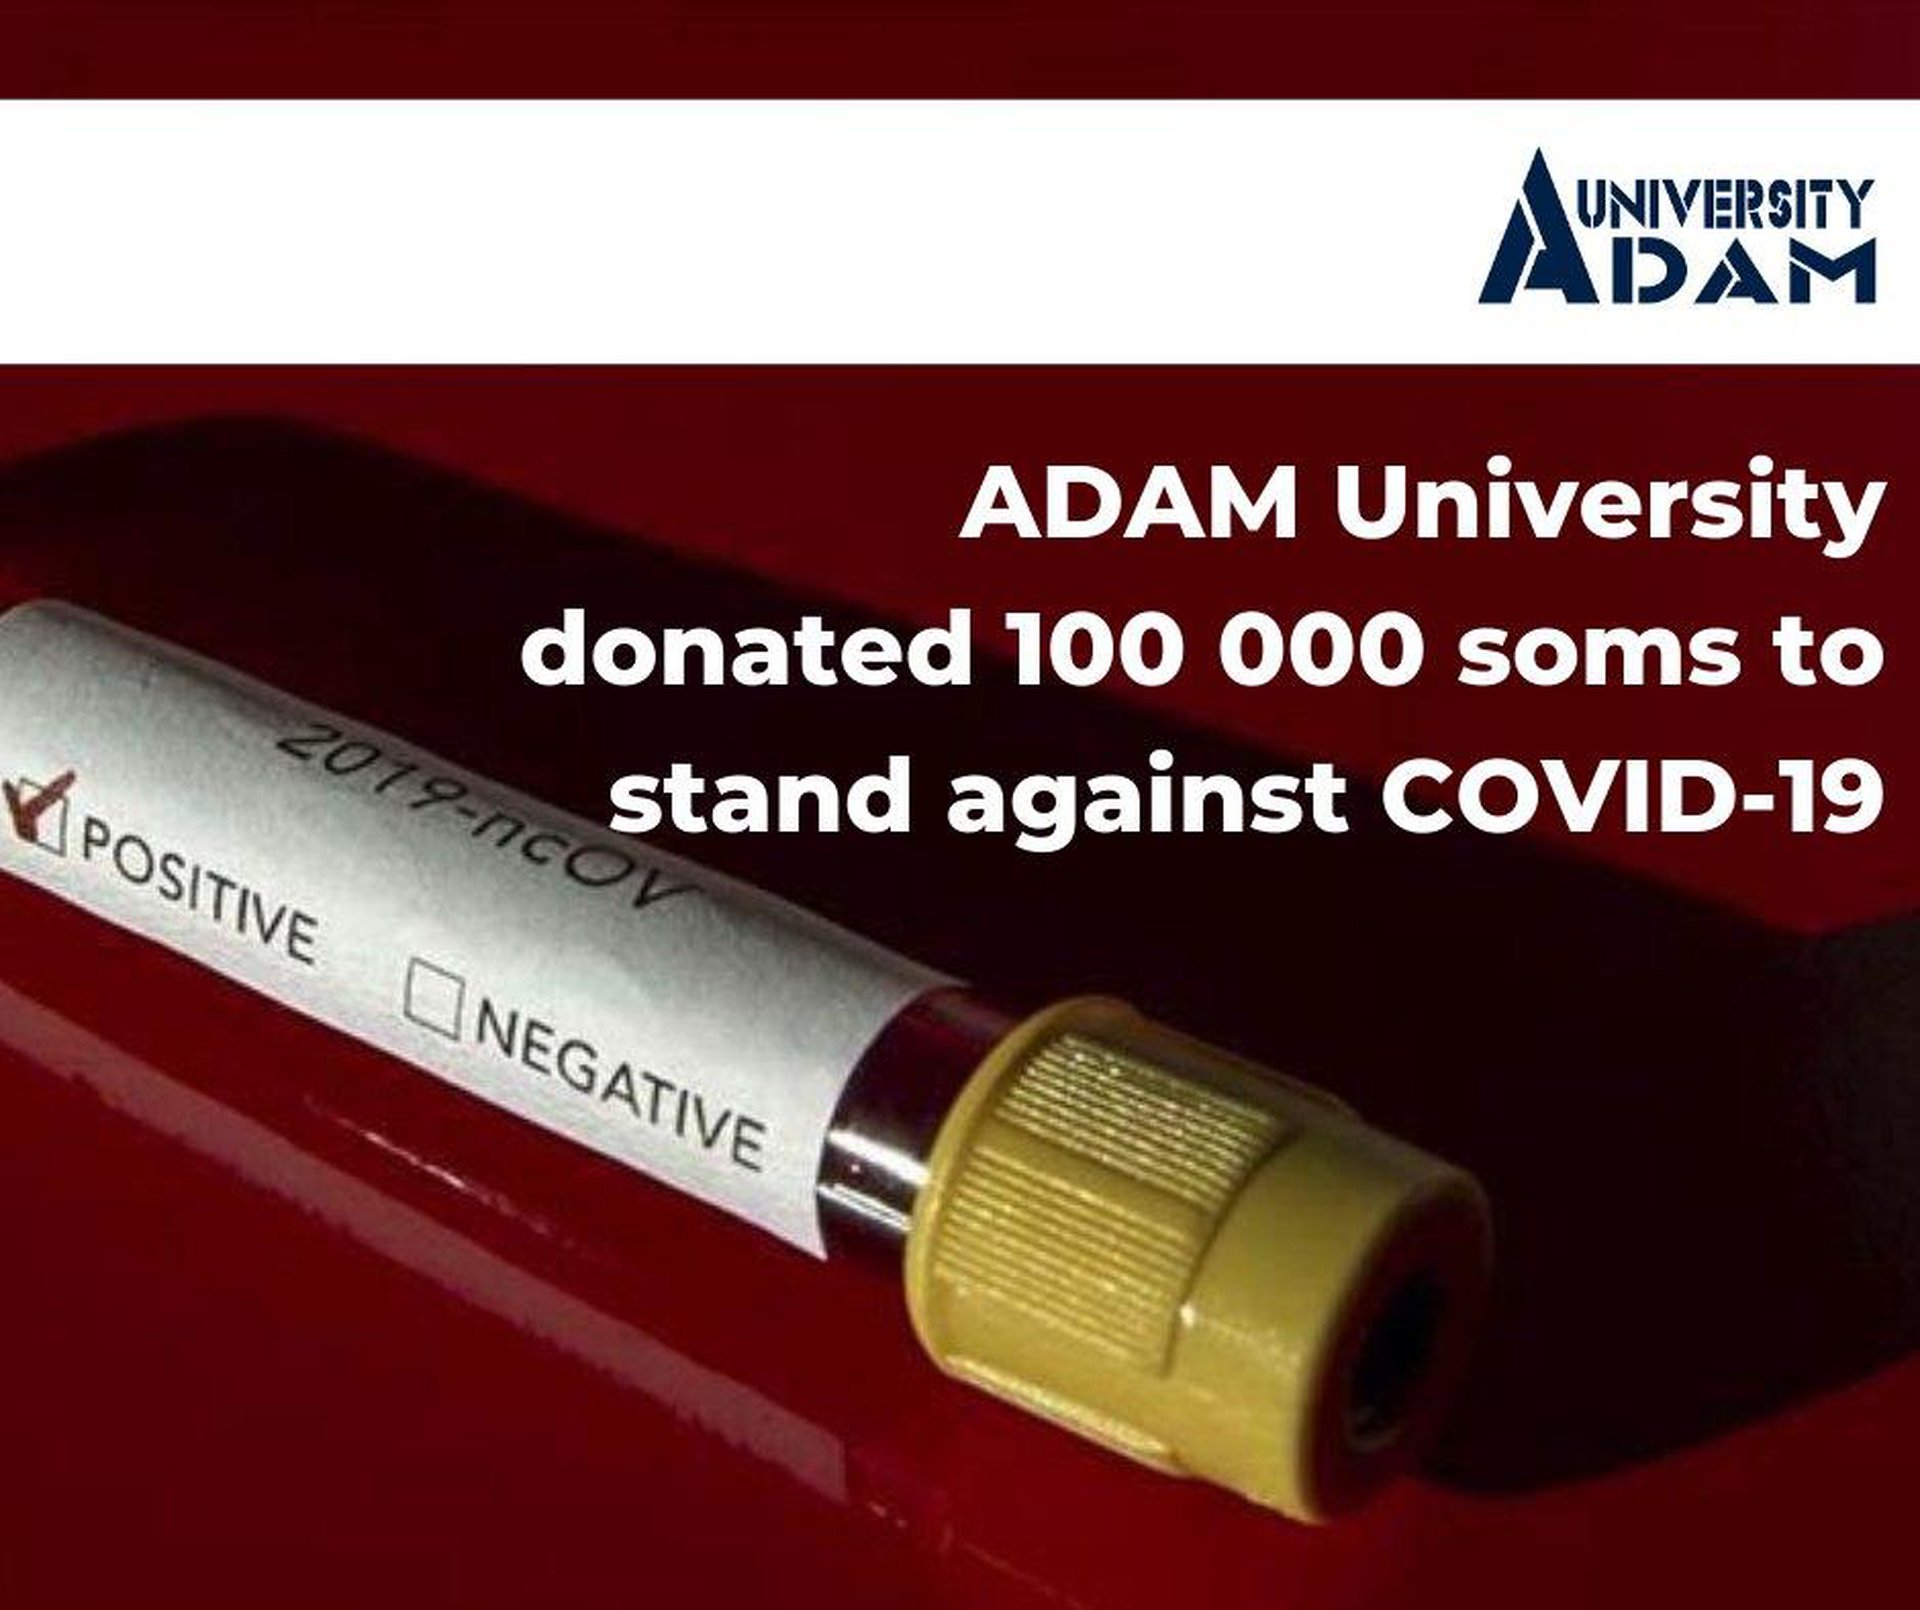 ADAM University donated 100 000 soms to stand against COVID-19 in Kyrgyzstan.